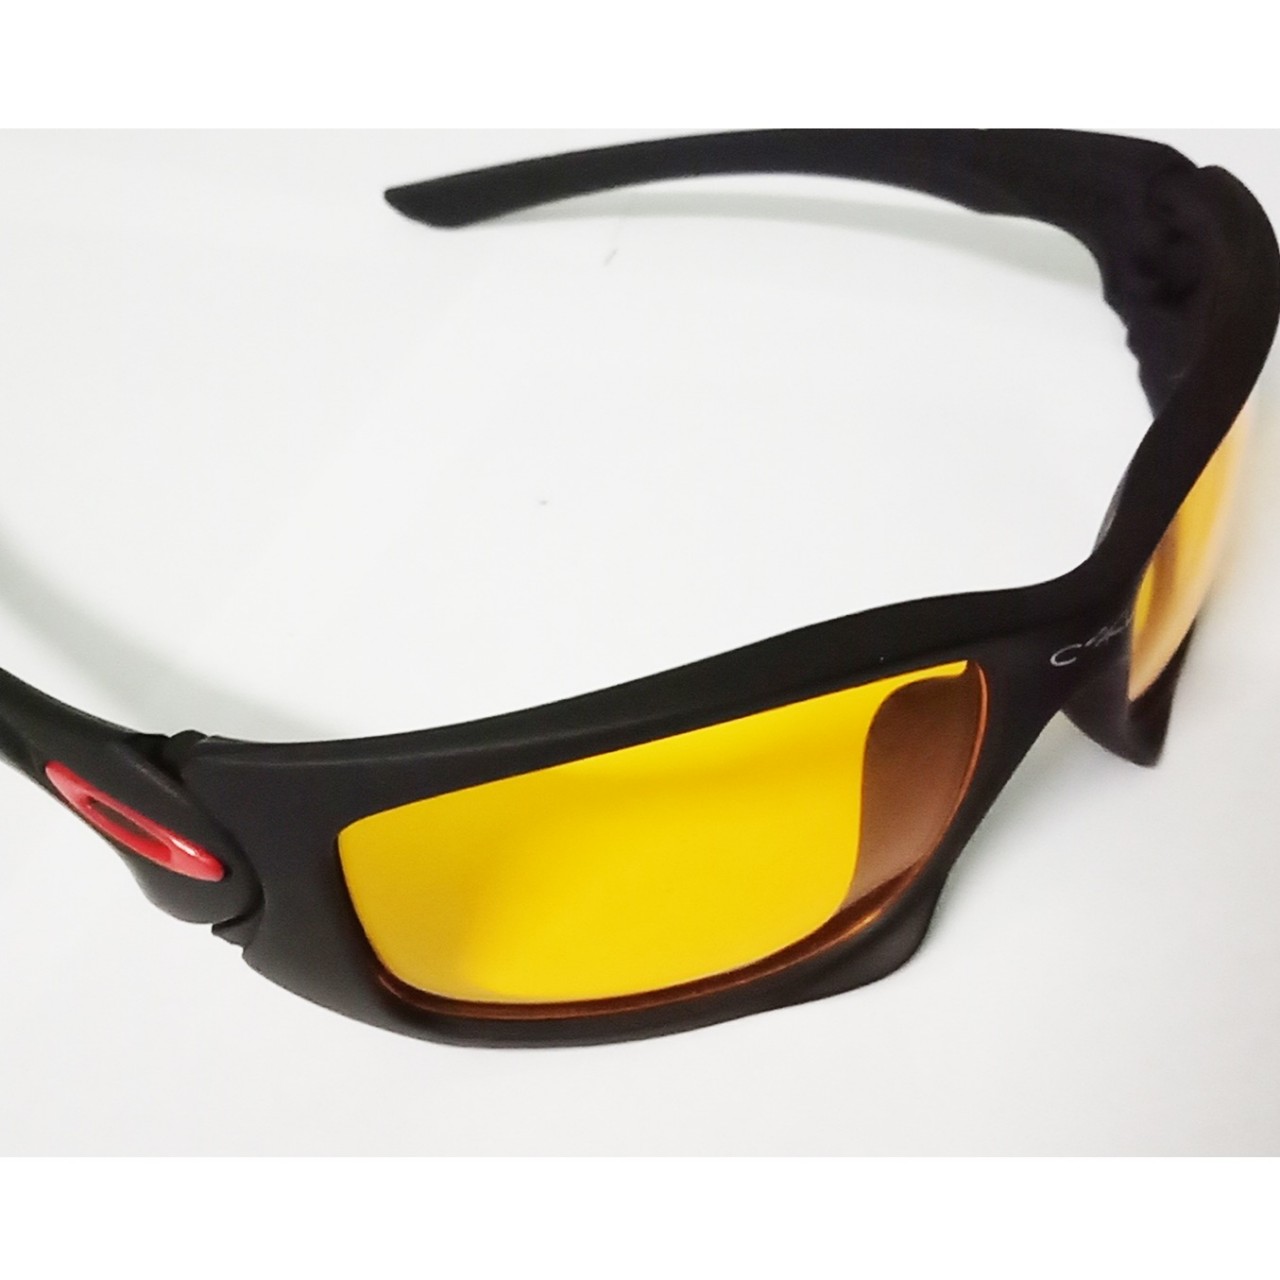 Night Vision Hd Glasses In Yellow Color